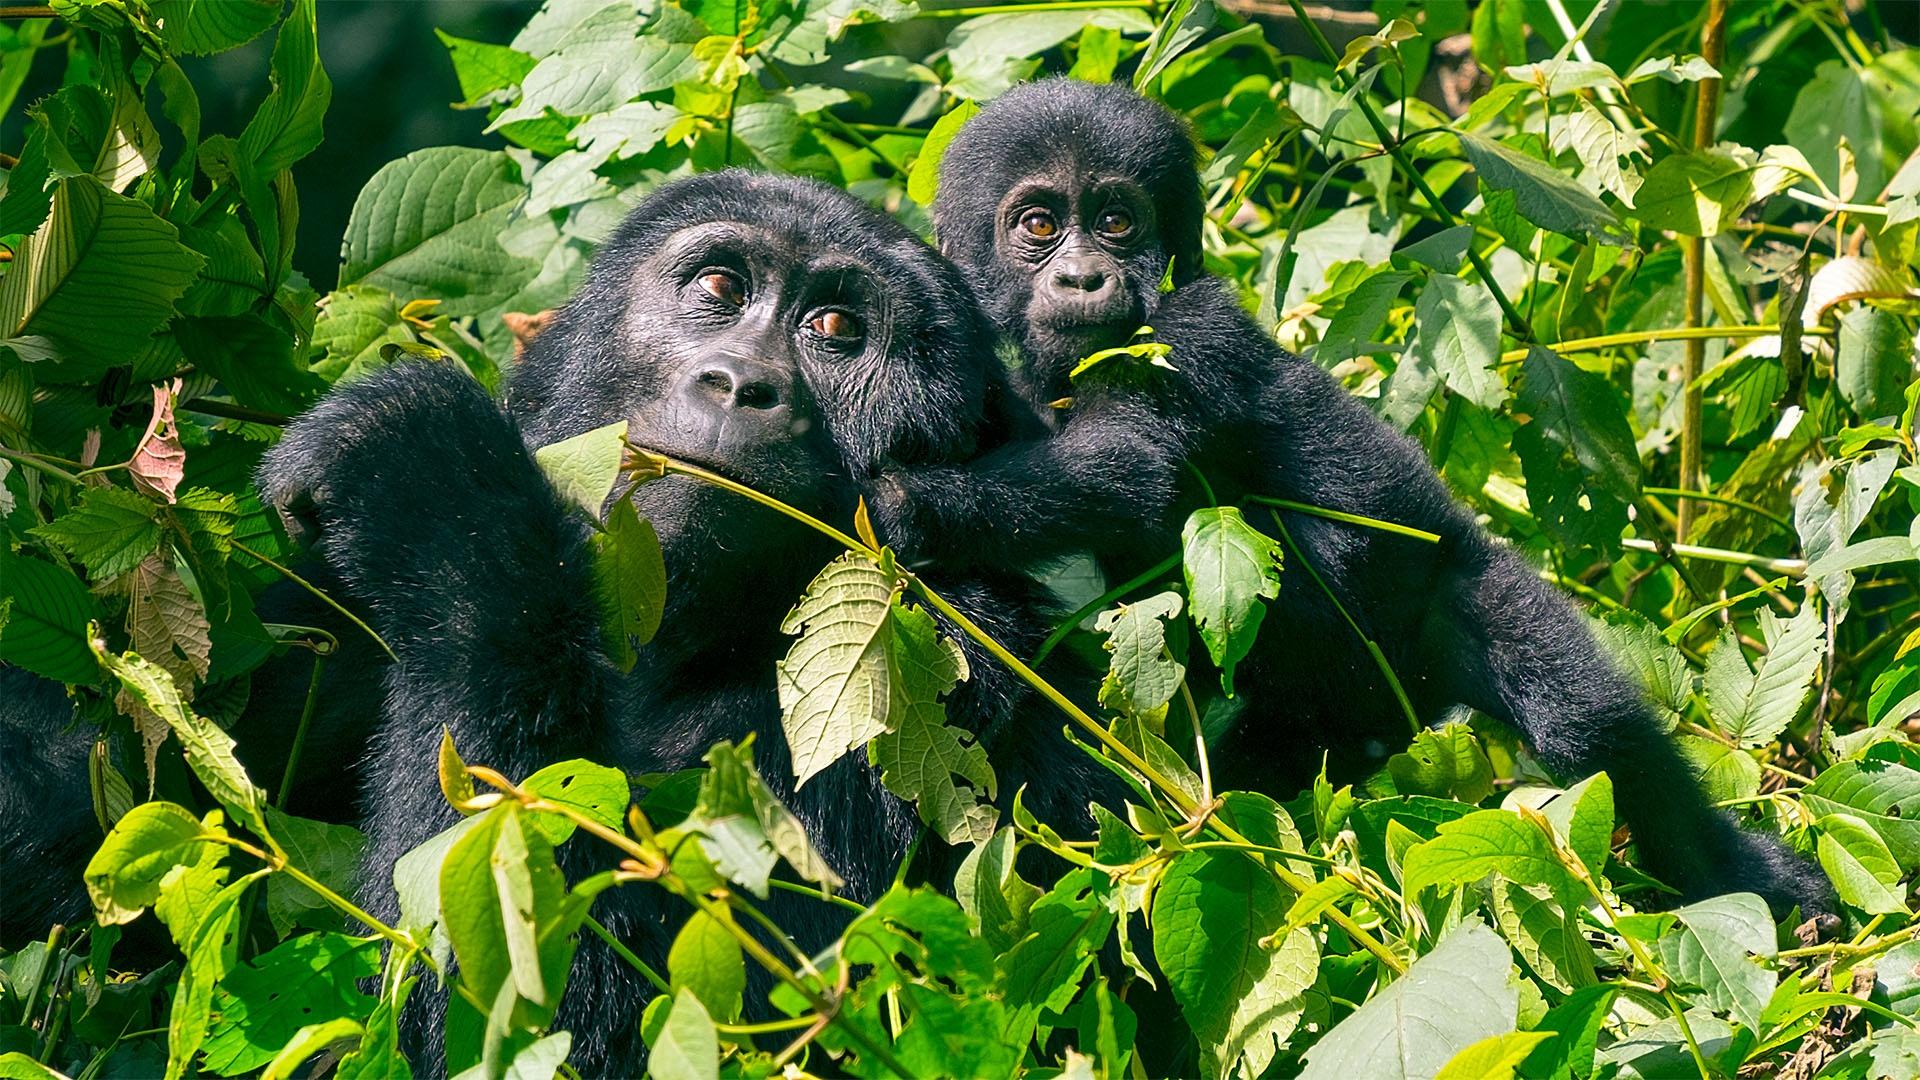 Image of mountain gorilla baby and mother